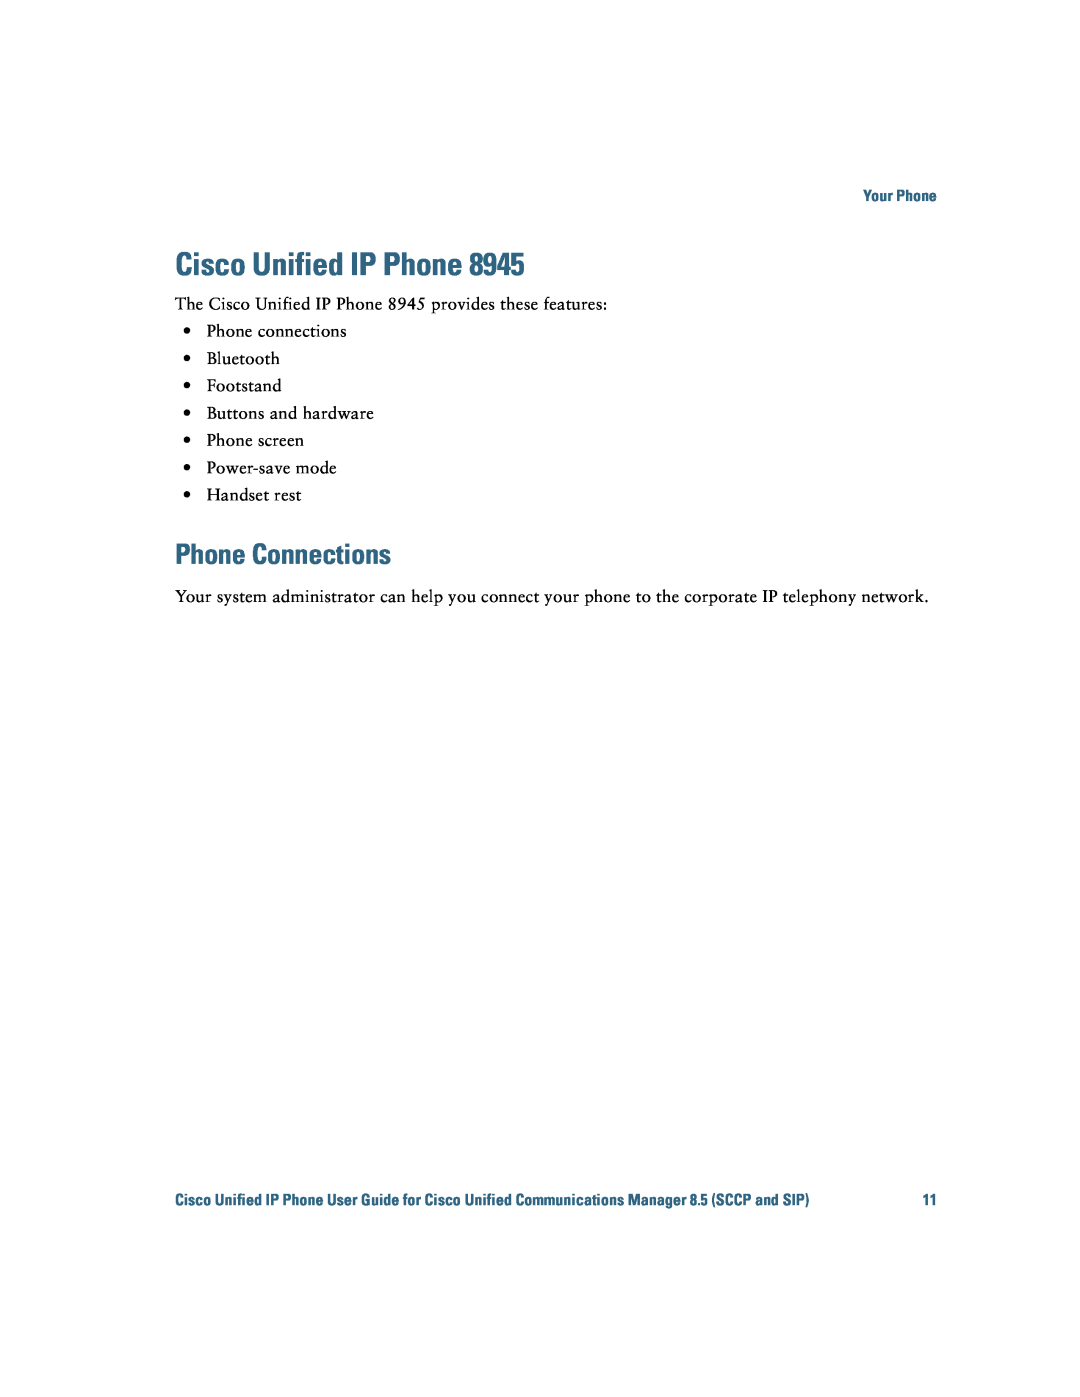 Cisco Systems IP Phone 8941 and 8945 manual Cisco Unified IP Phone, Phone Connections, Your Phone 